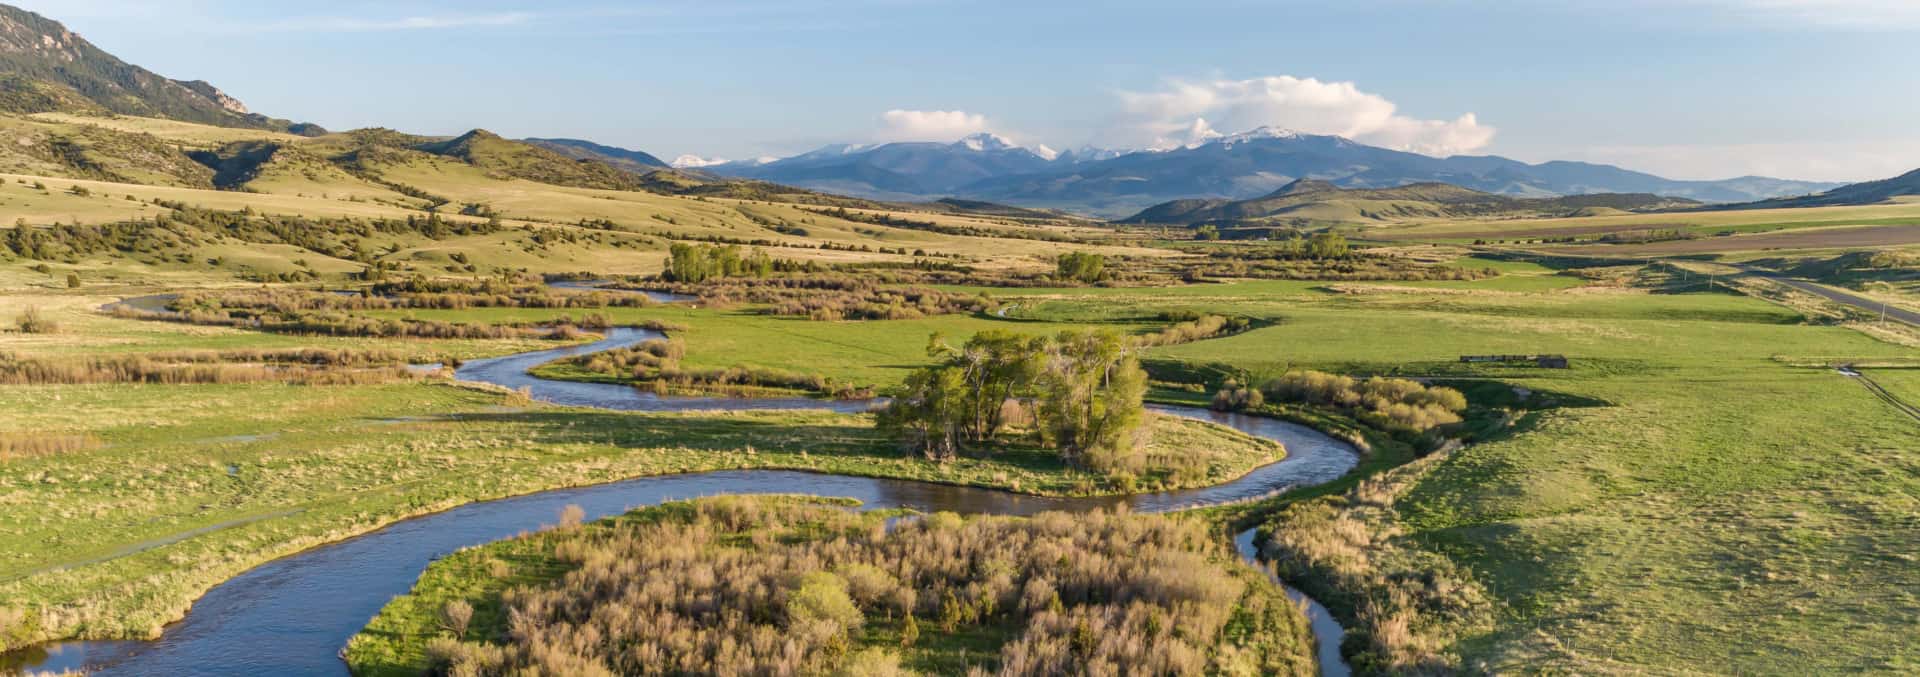 montana hunting ranch for sale north boulder river ranch